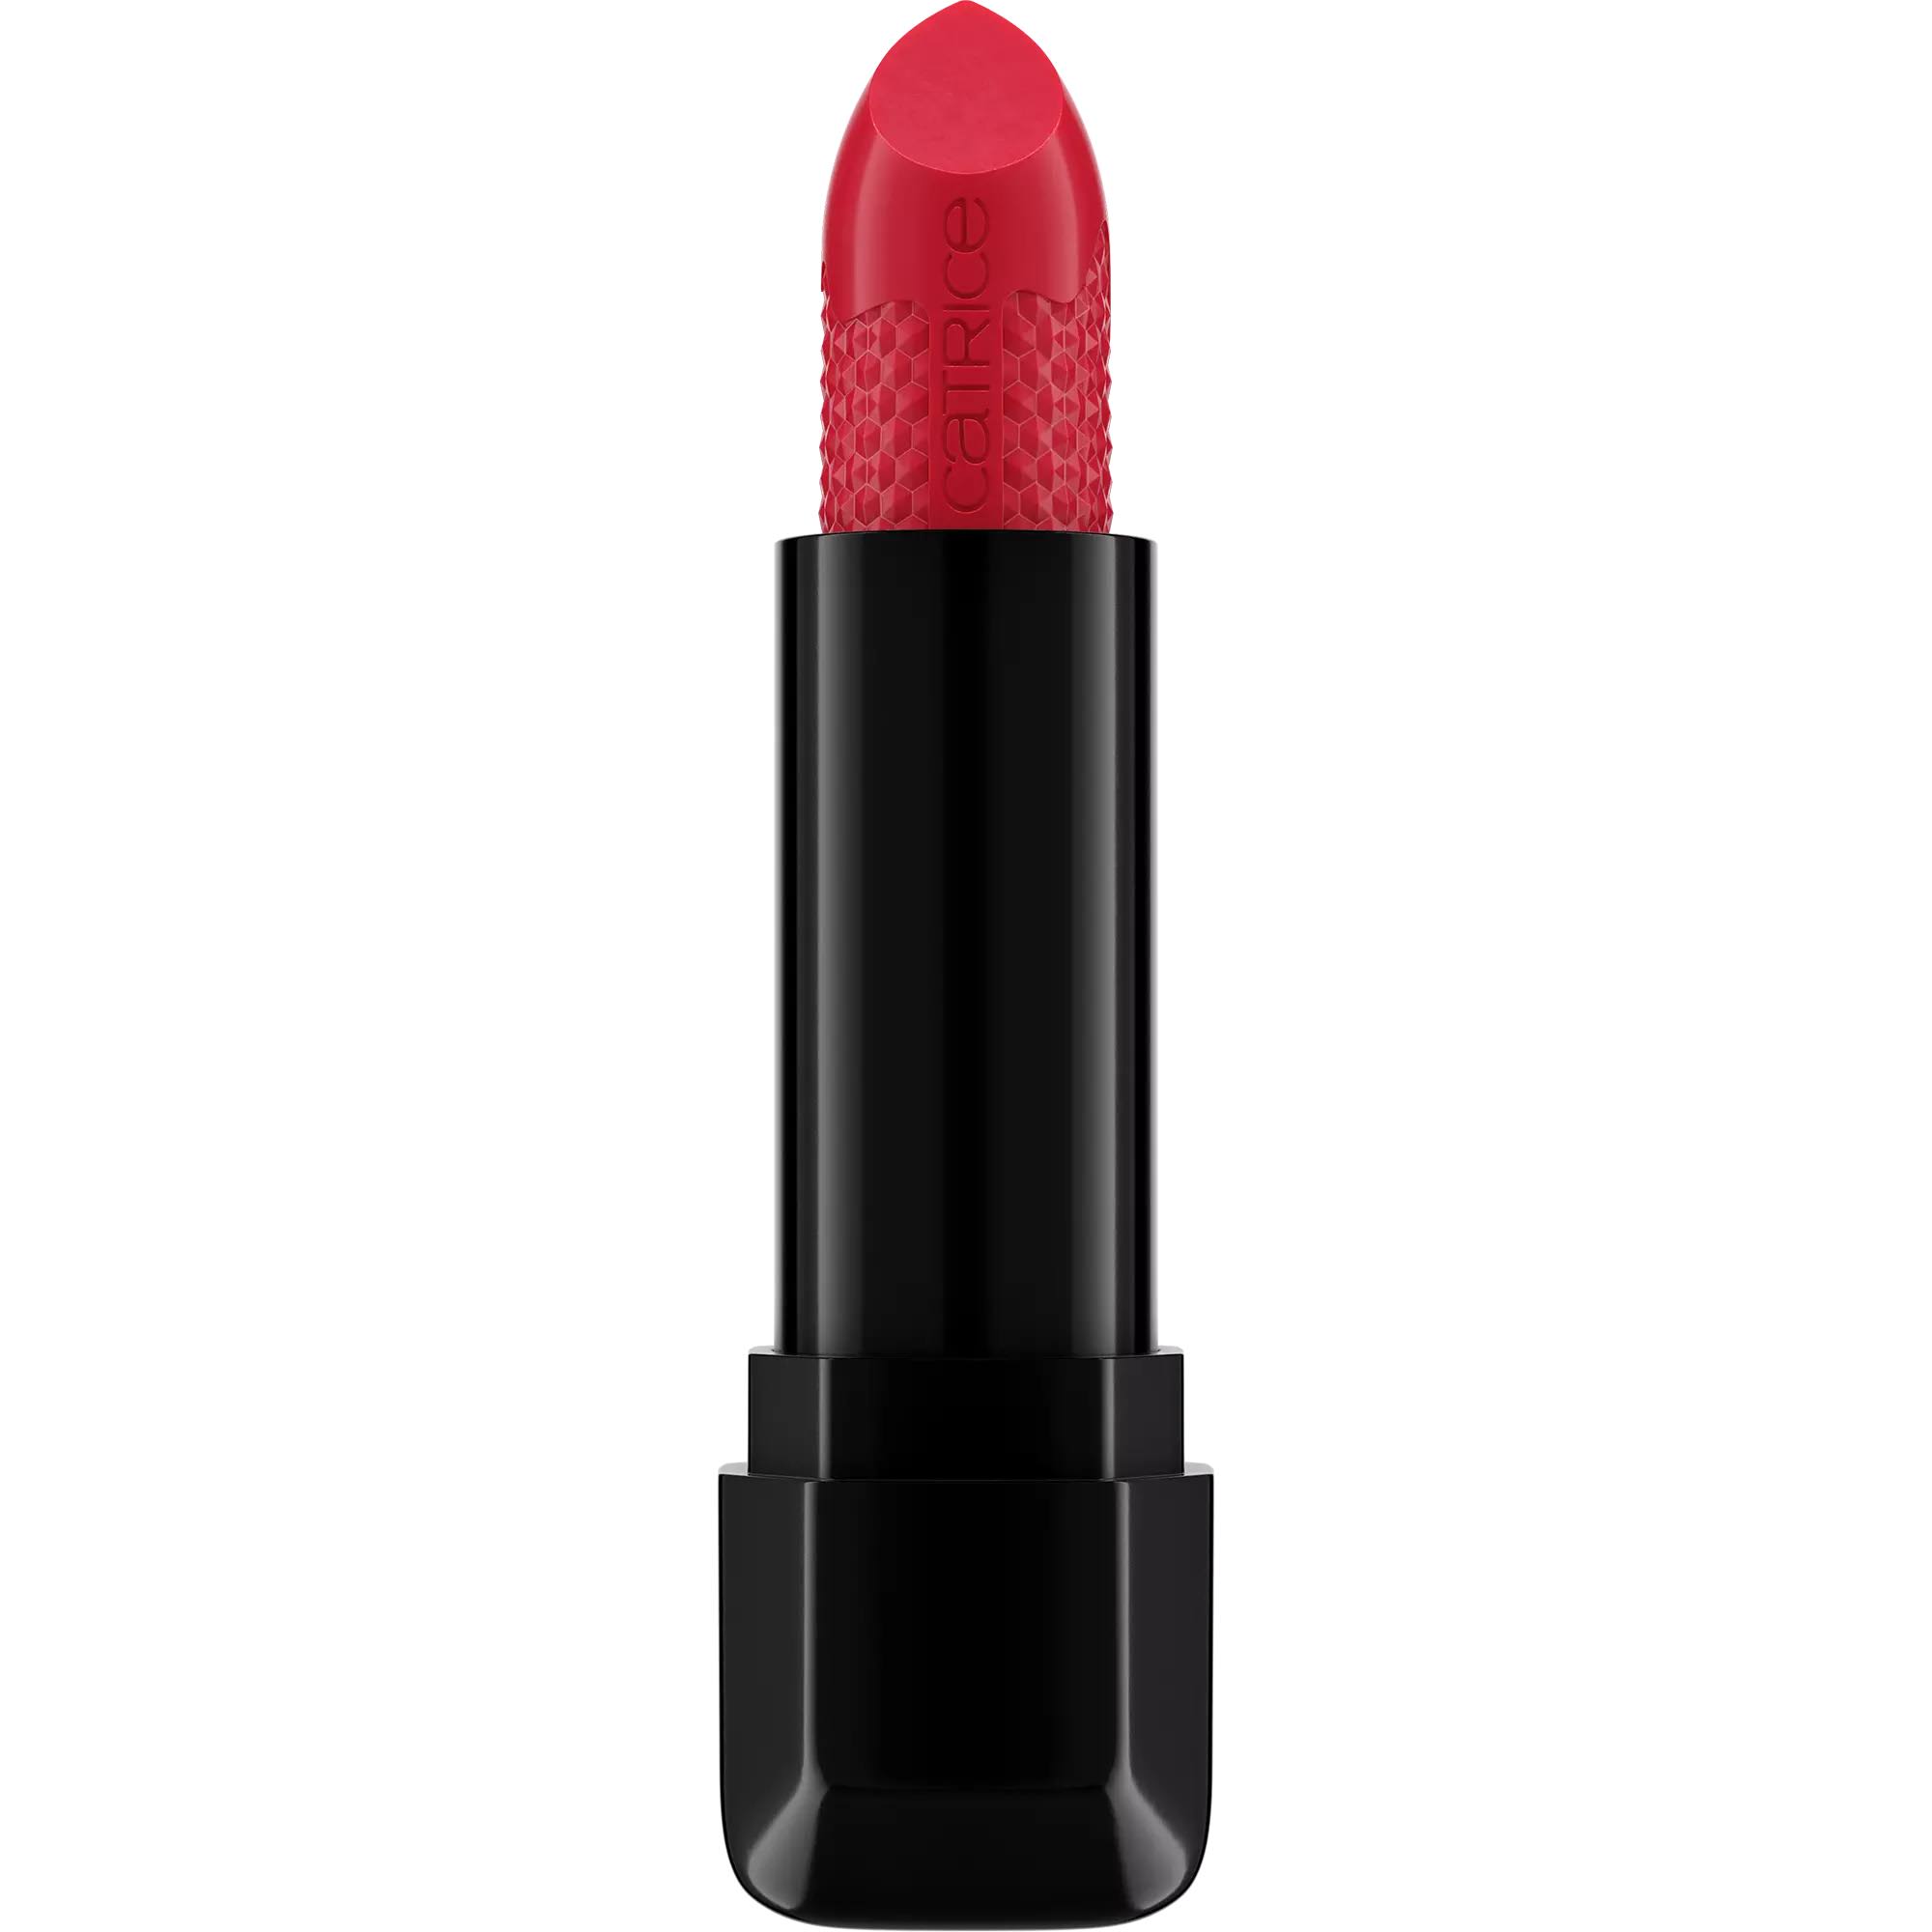 Catrice Shine Bomb Lipstick Color 090 Queen of Hearts 3.5g